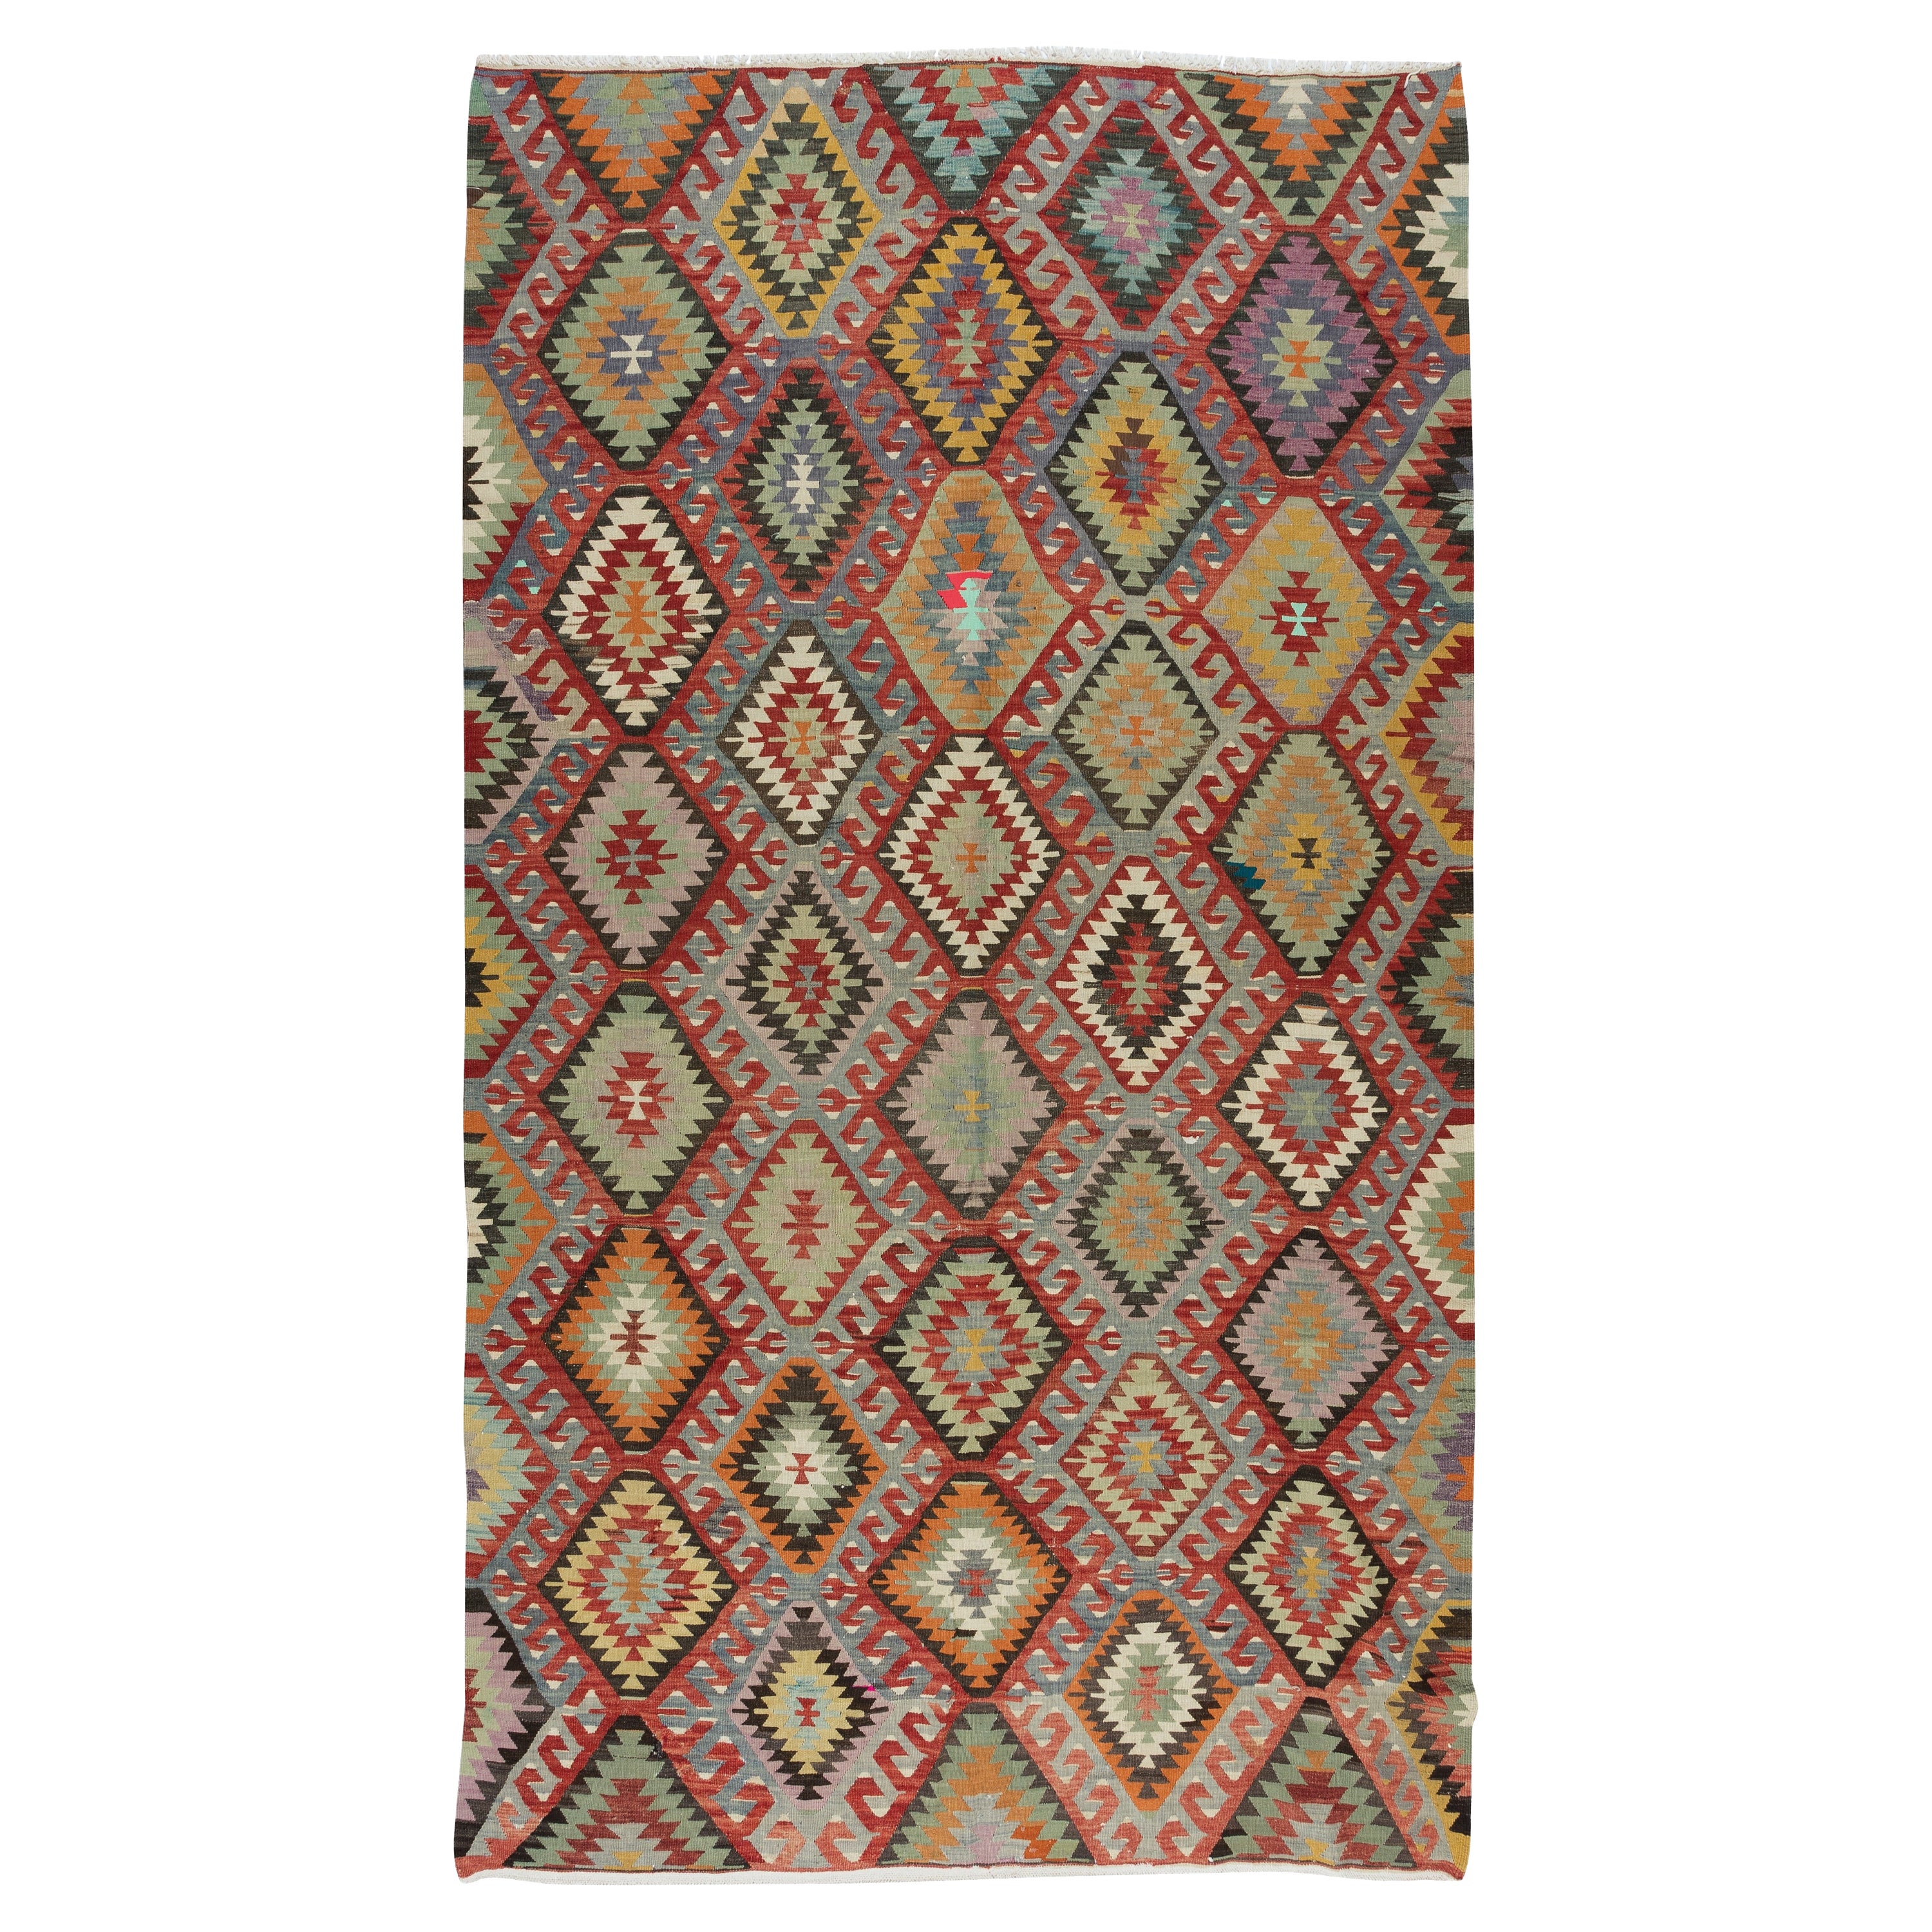 5.8x10 Ft One of a Kind Handmade Turkish Wool Kilim, Multicolored Flat-Weave Rug For Sale